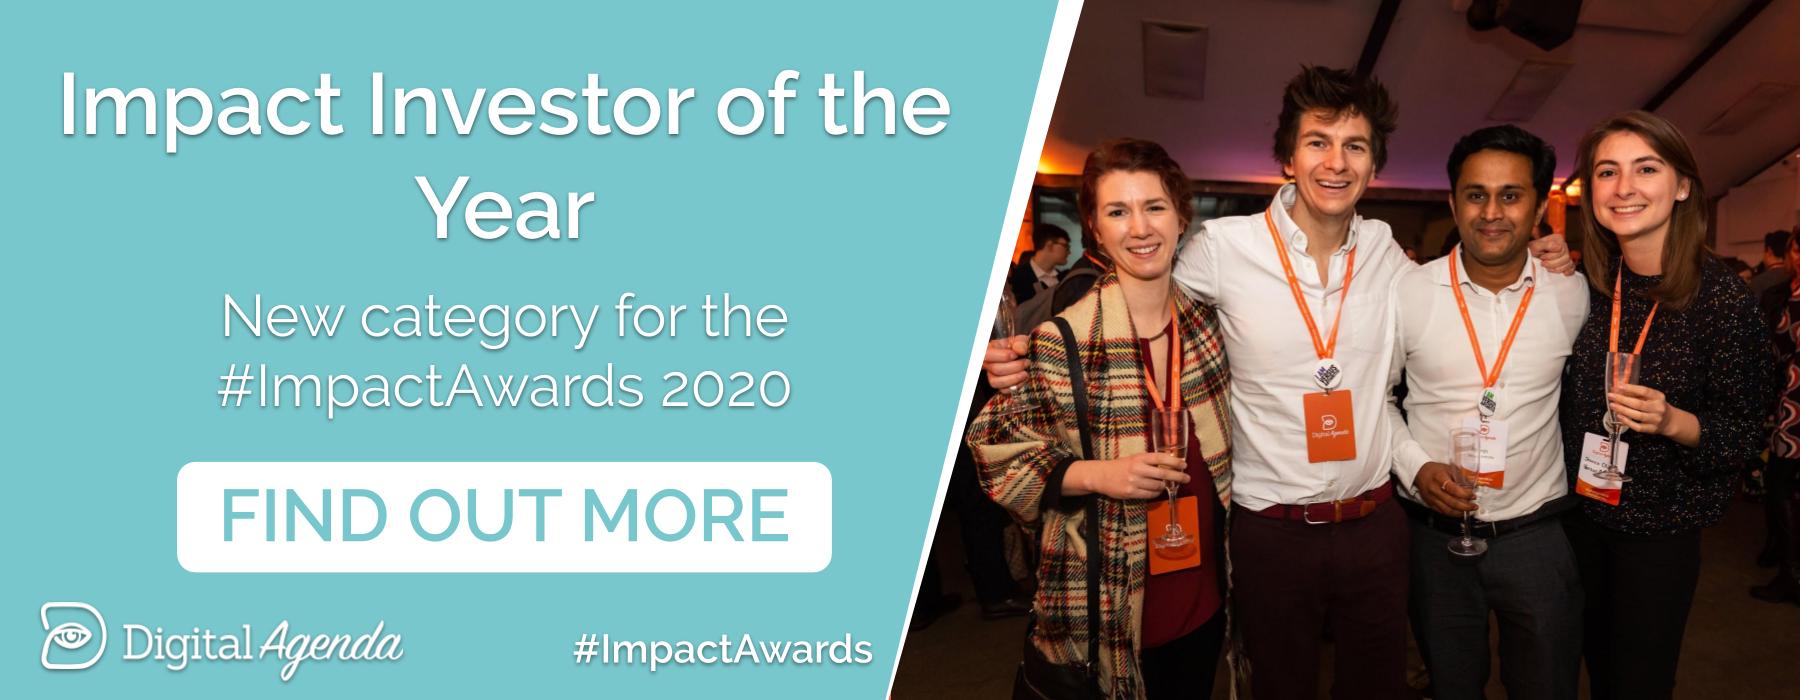 Impact Investor of the Year graphic